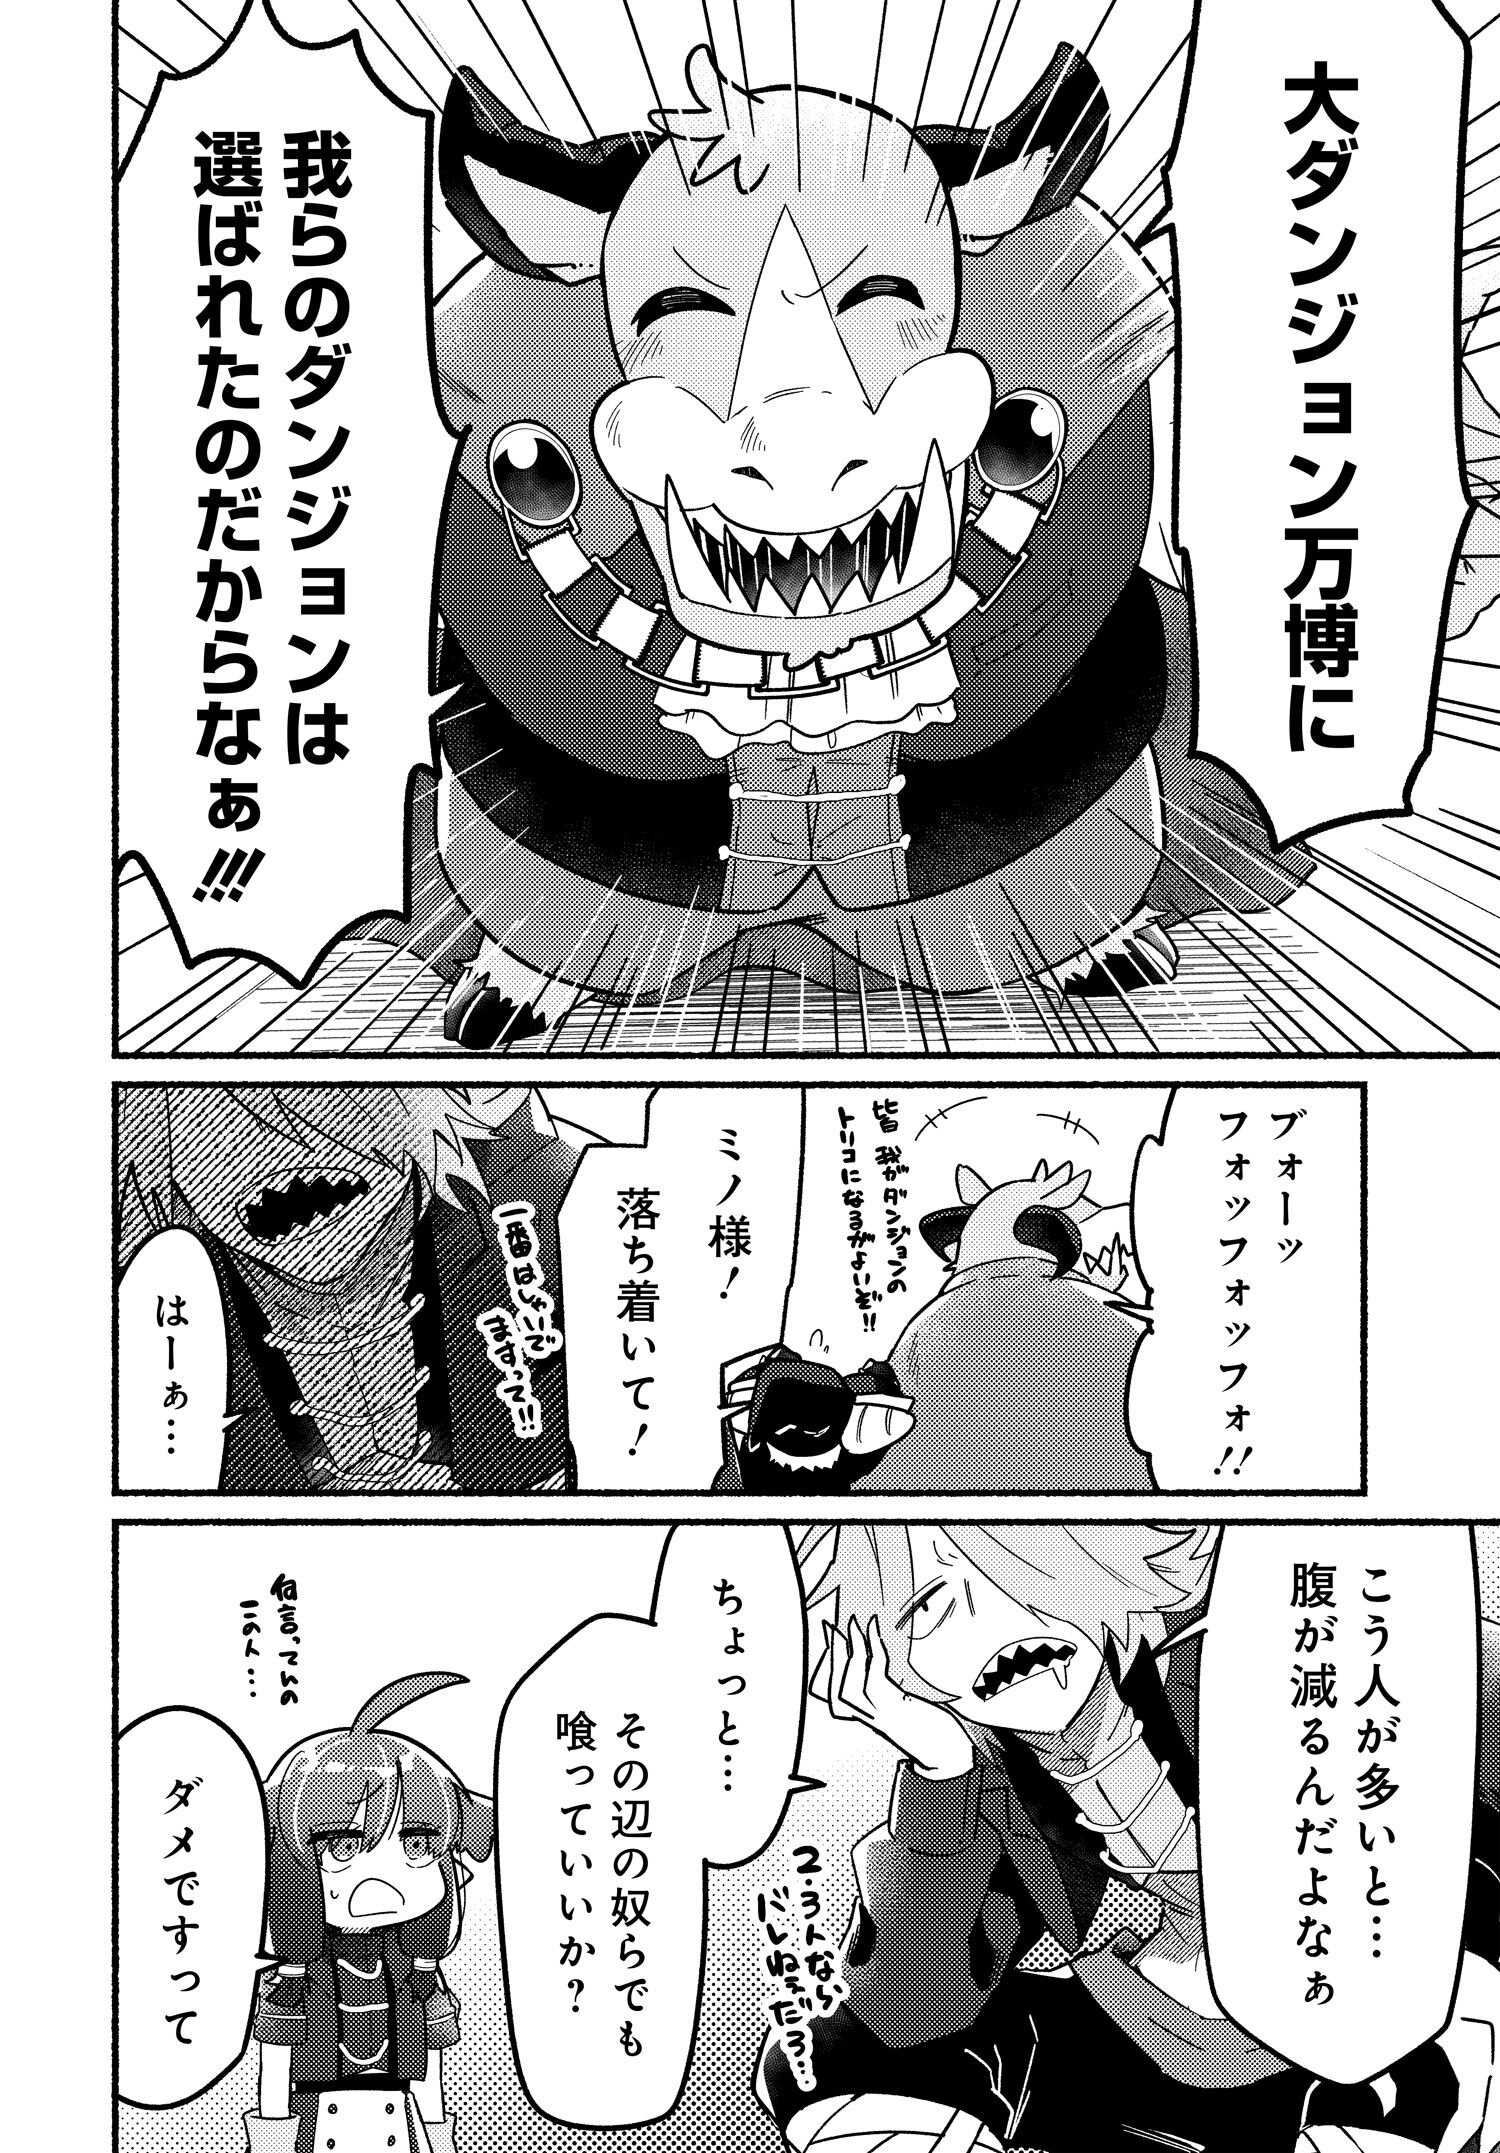 Shougyou Dungeon to Slime Maou - Chapter 6.1 - Page 6